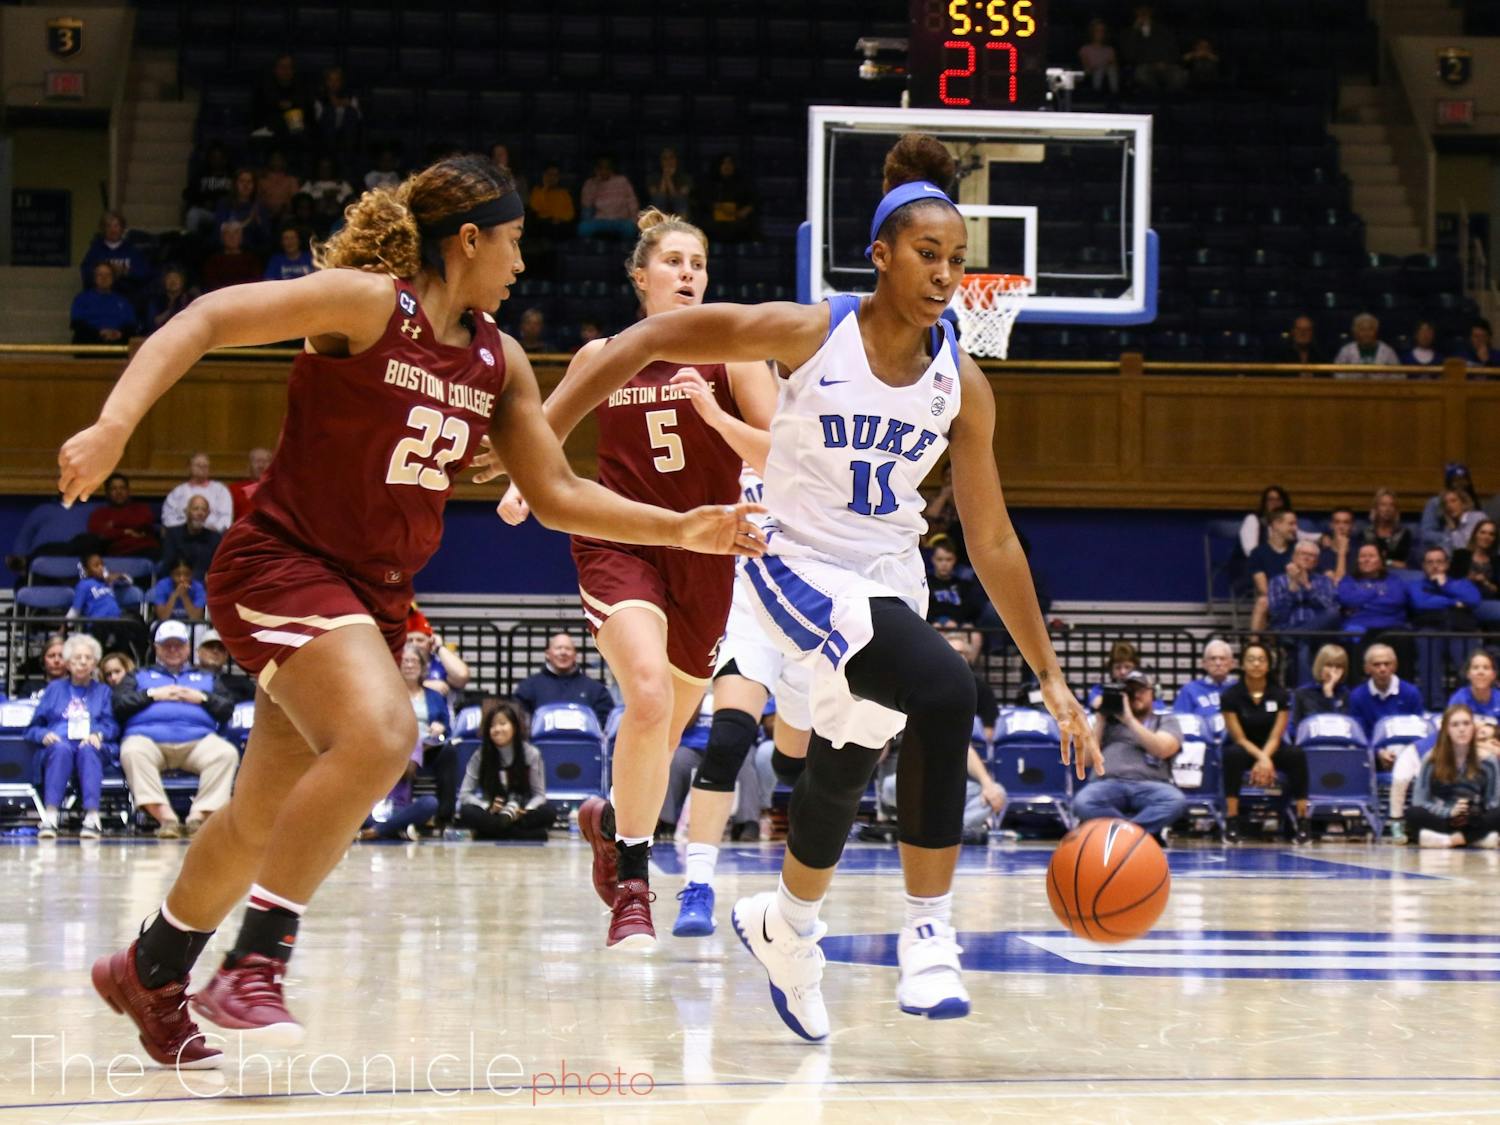 Duke Women's Basketball played Boston College at Cameron Indoor Stadium. The Blue Devils won the home game, final score 85-73.